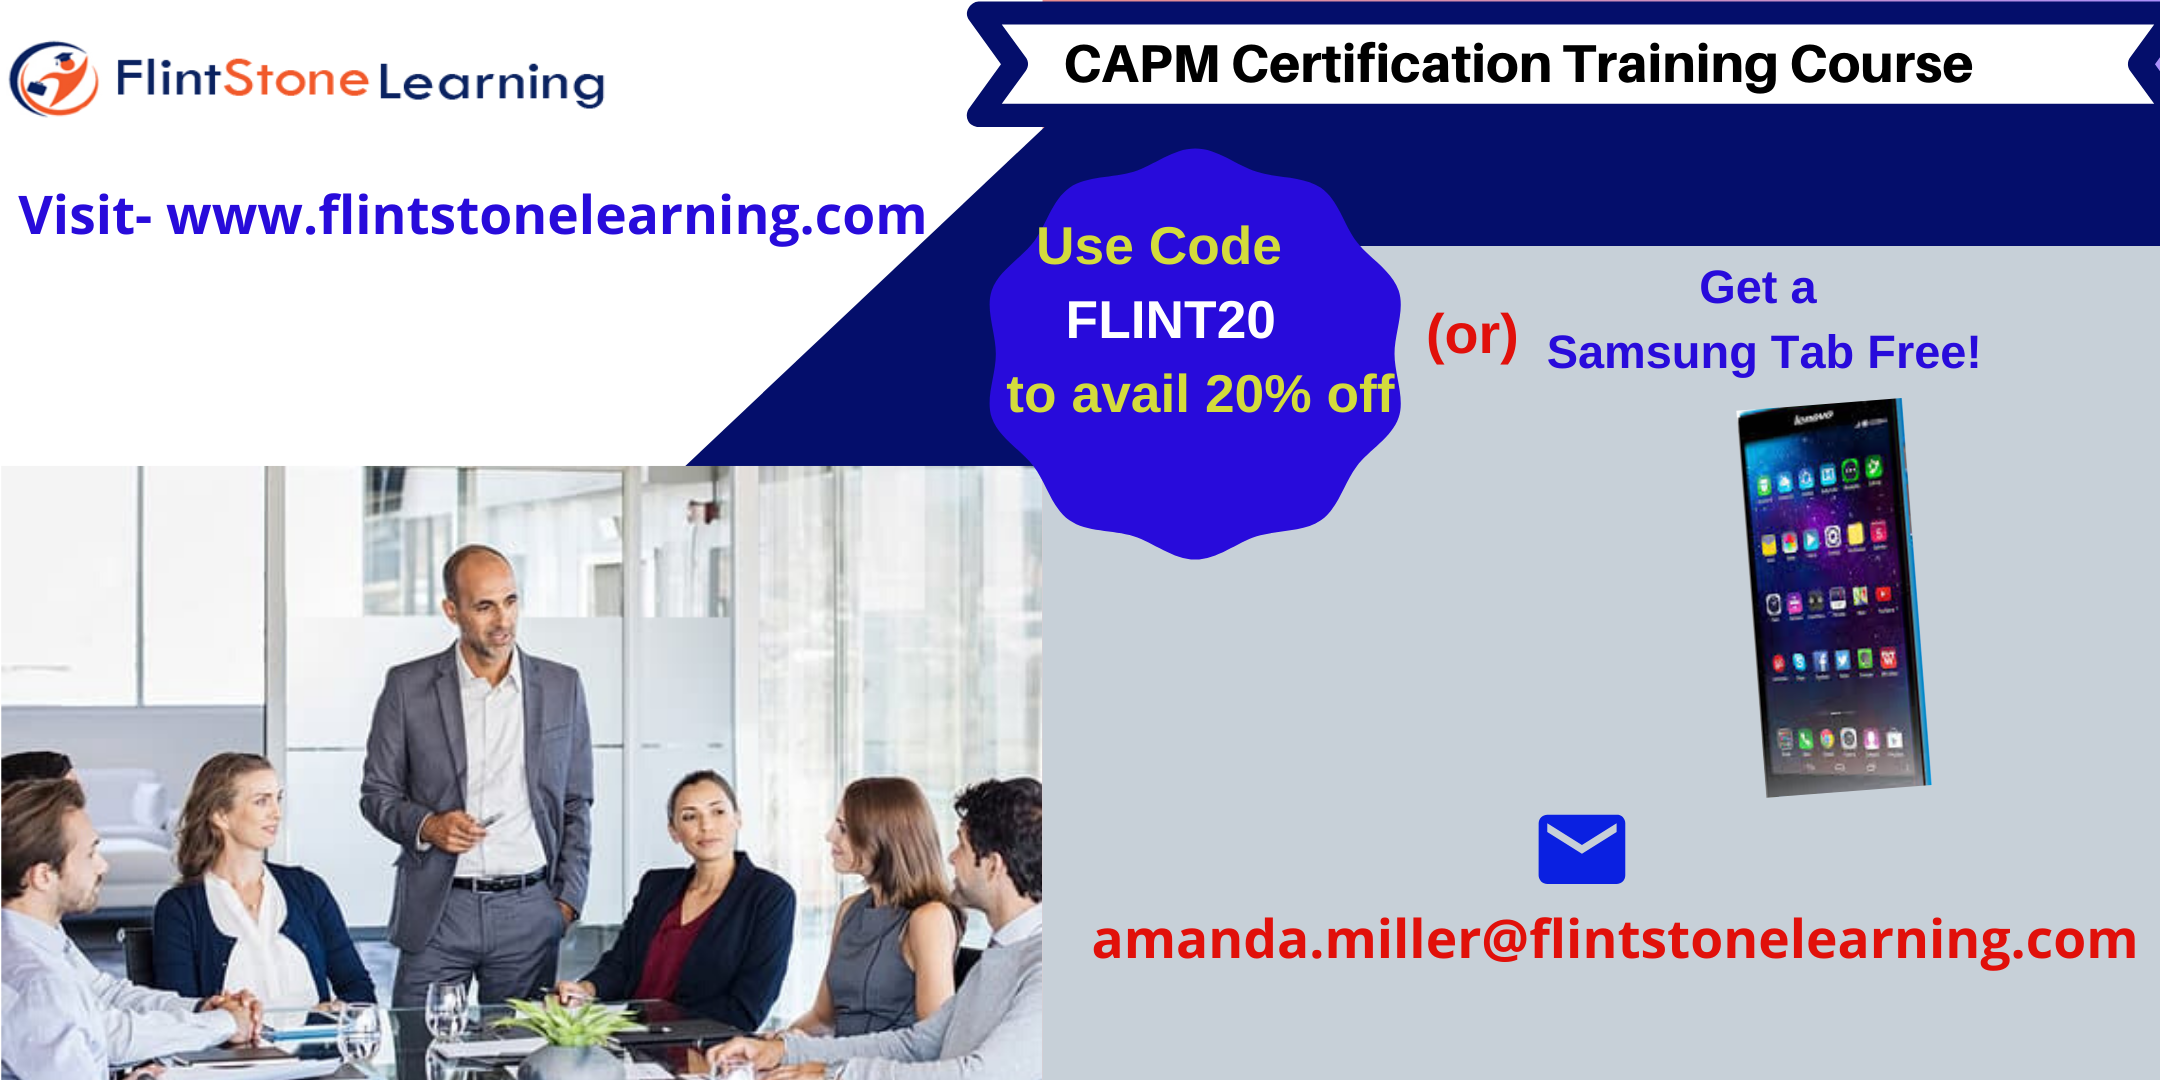 CAPM Certification Training Course in Hanover, NH